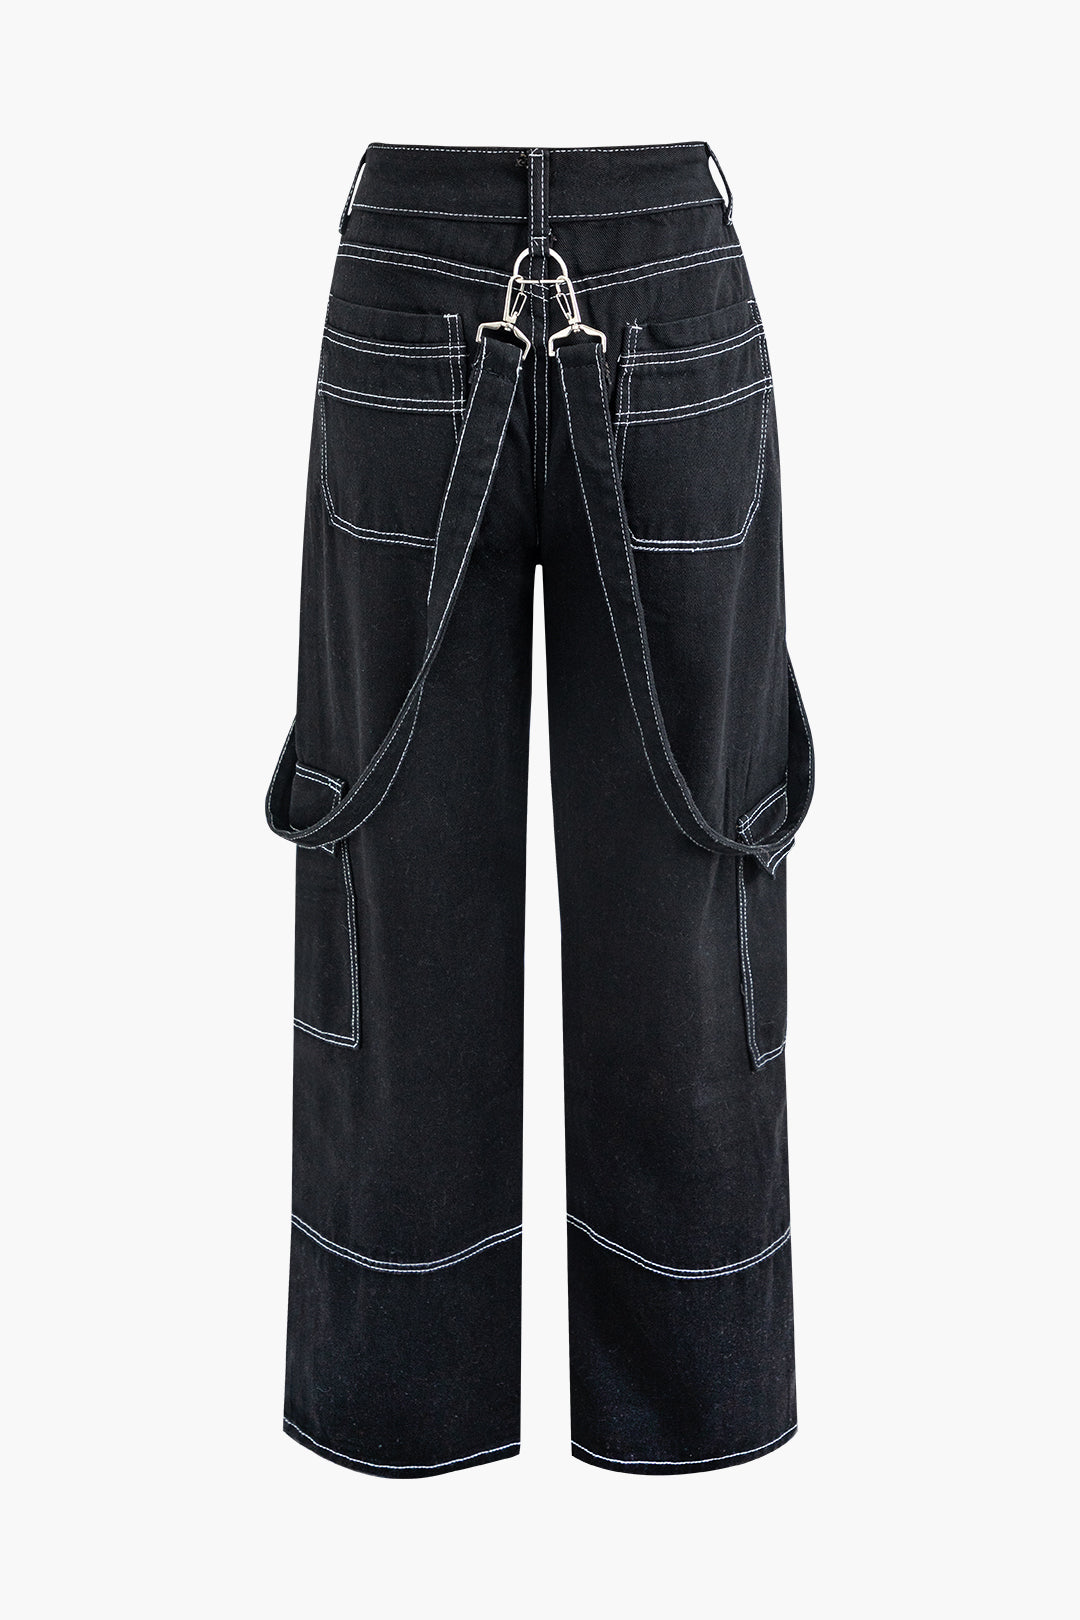 Stitching Straight Leg Flap Pocket Jeans With Eyelet Tie